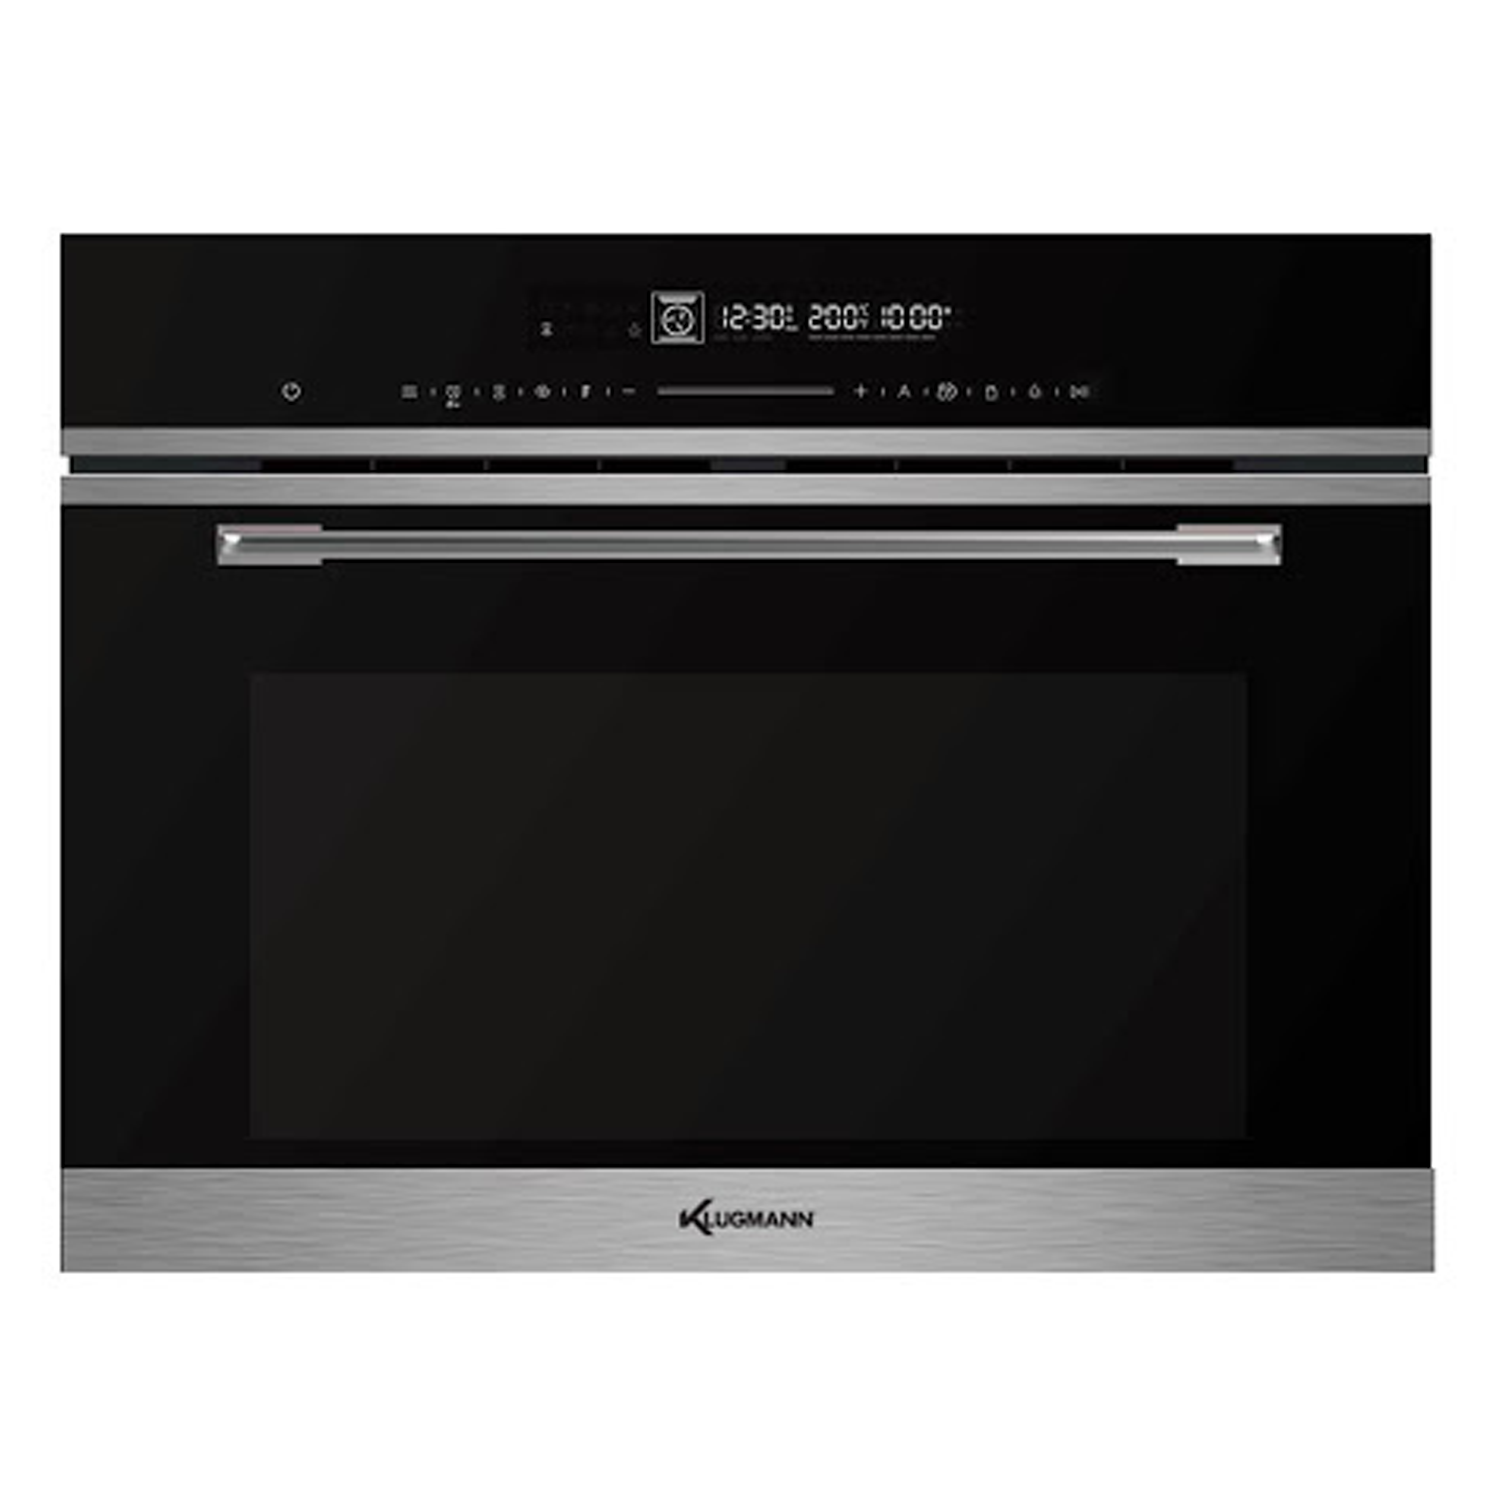 Klugmann Built In Electric Microwave Oven 60 Cm 50 L With Double Grill